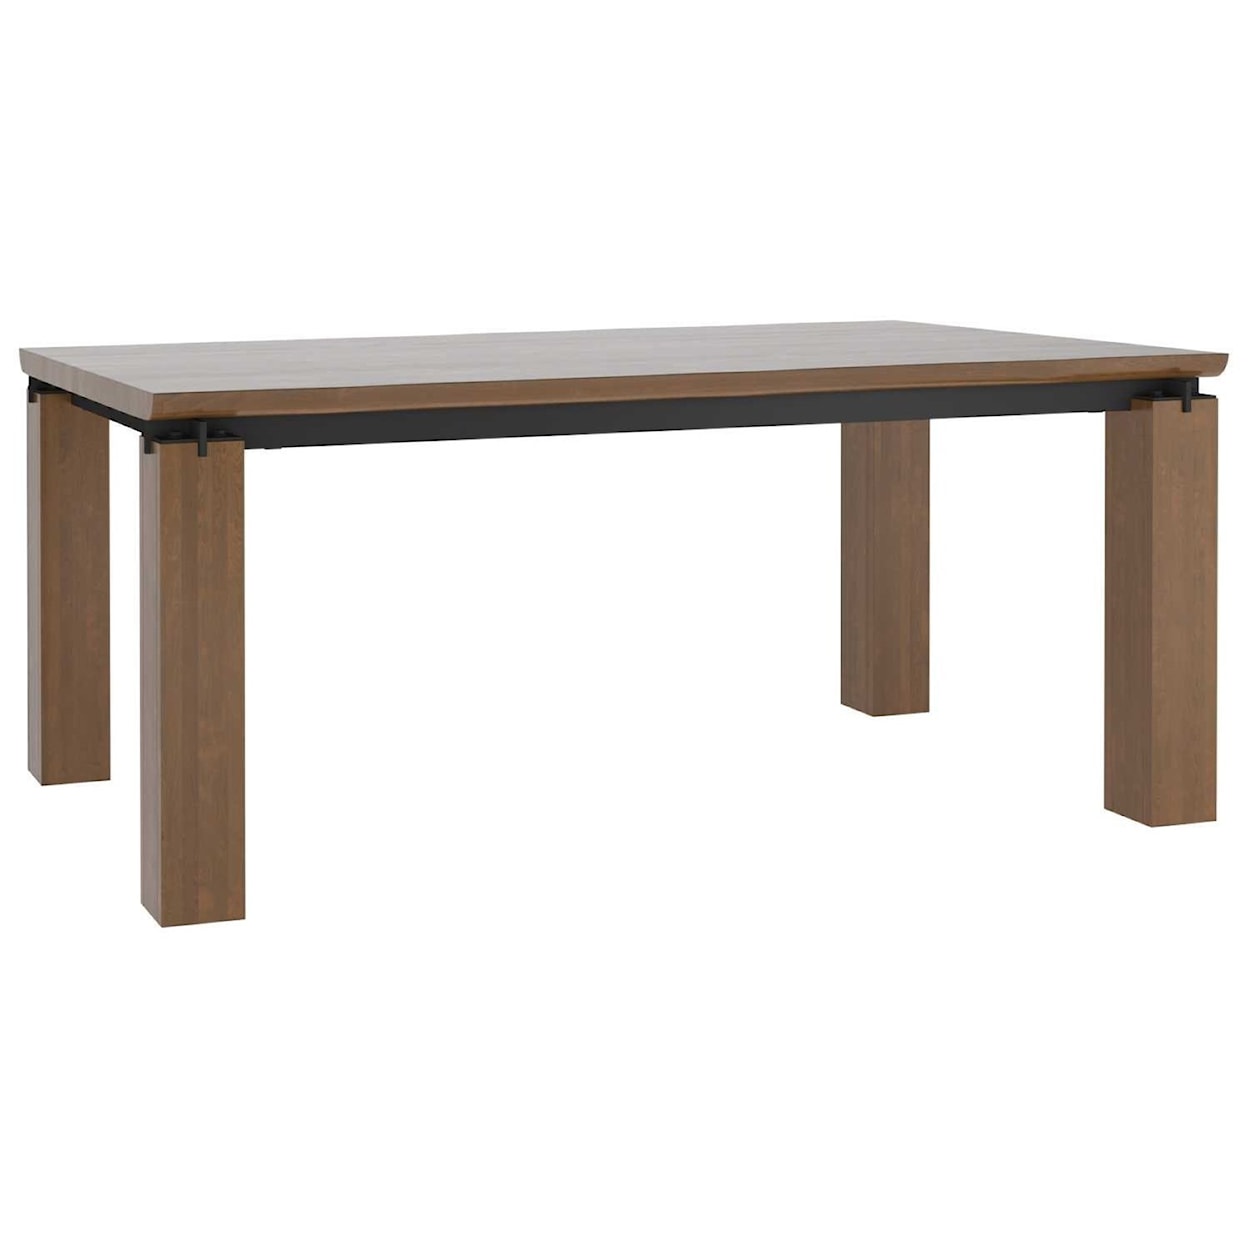 Canadel East Side Customizable Wood Top Dining Table